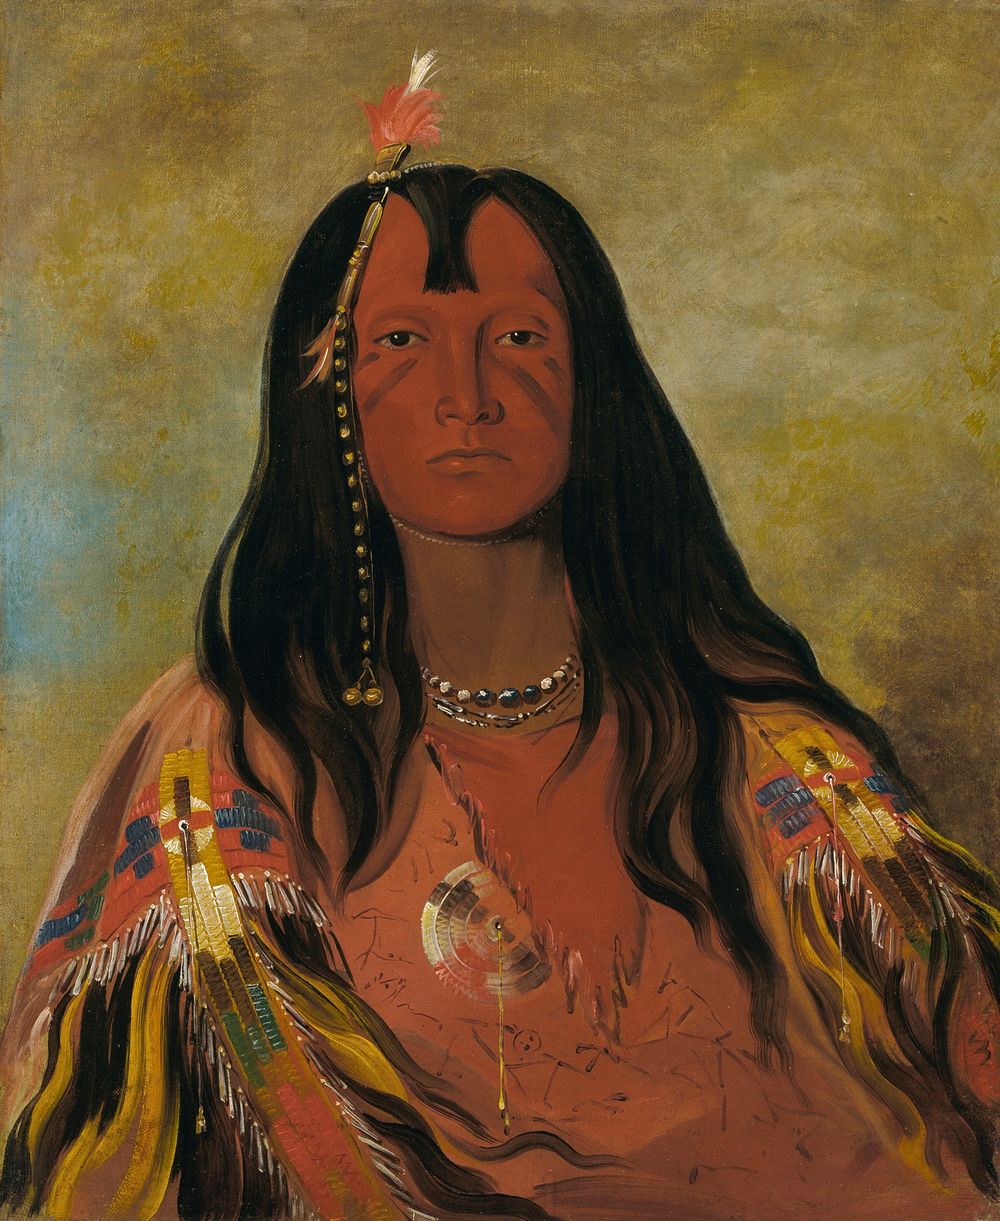 H'co-a-h'co-a-h'cotes-min, No Horns on His Head, a Brave (1832) painting in high resolution by George Catlin.  